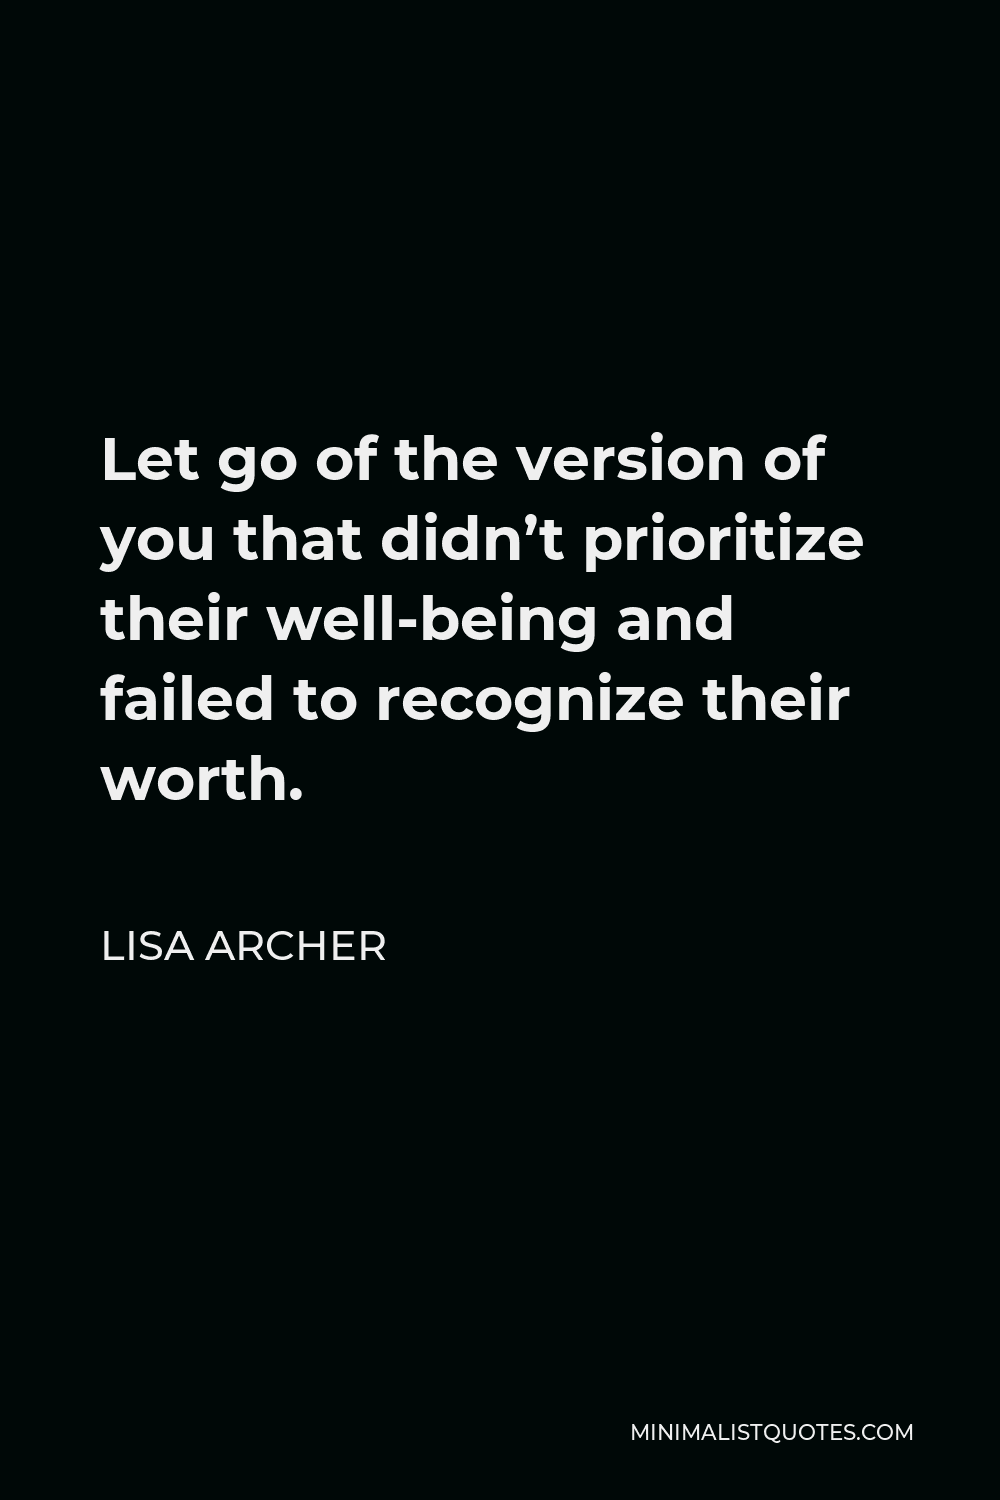 Lisa Archer Quote - Let go of the version of you that didn’t prioritize their well-being and failed to recognize their worth.